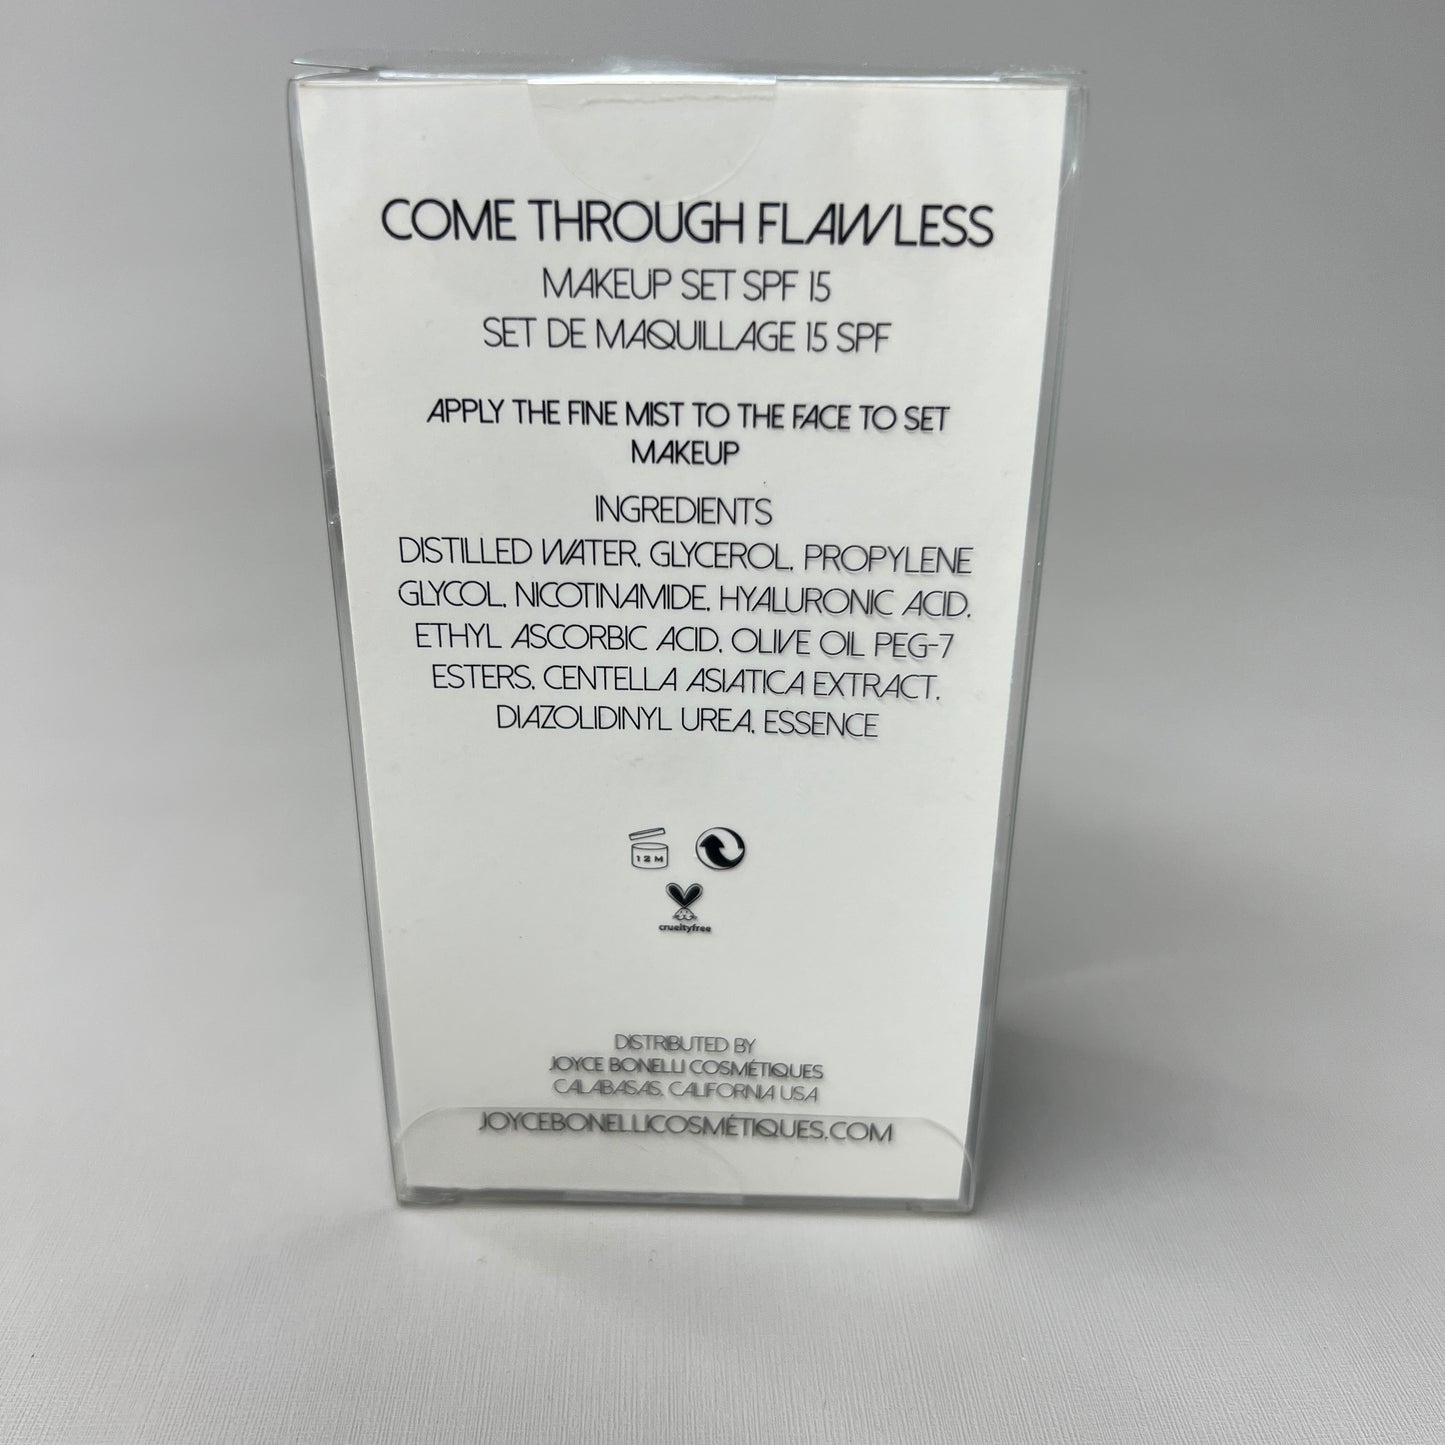 COME THROUGH FLAWLESS Makeup Setting Spray with SPF 15 1 oz (NEW)